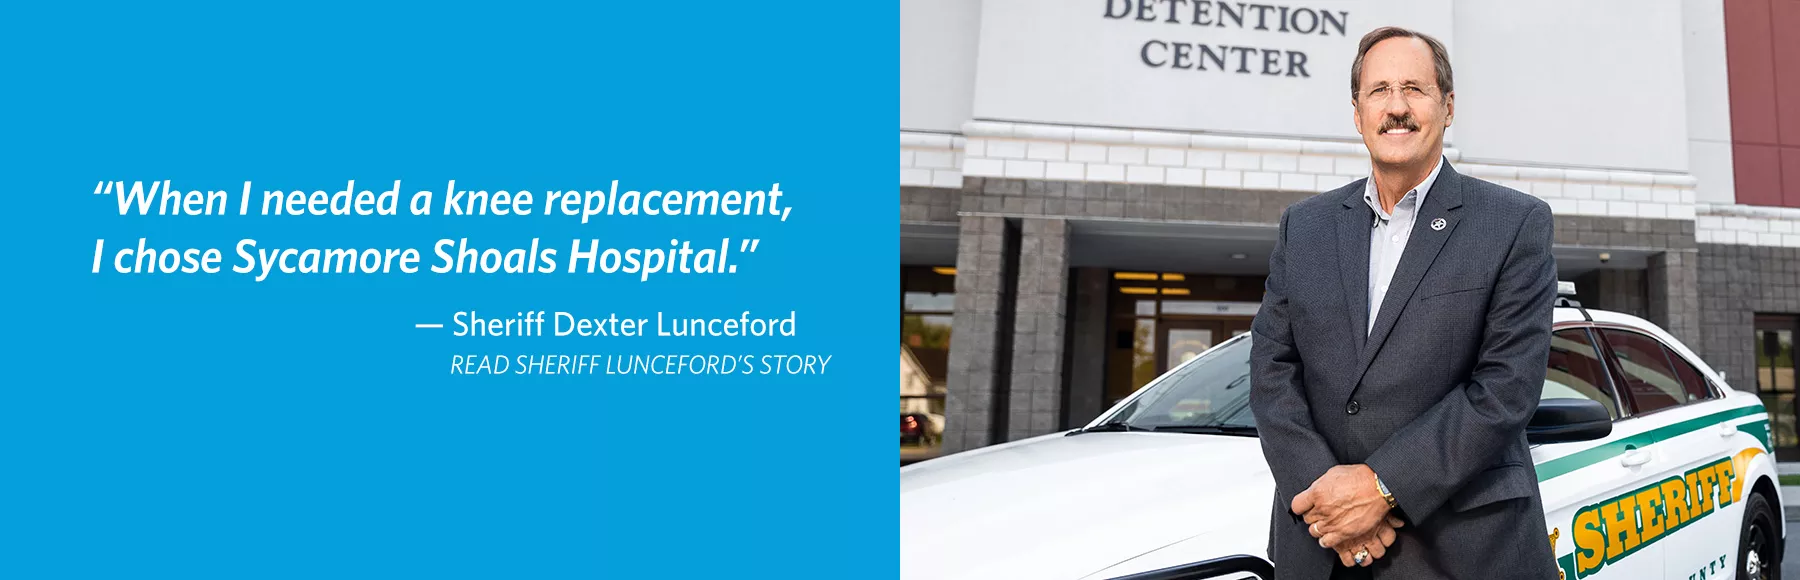 "When I needed a knee replacement, I chose Sycamore Shoals Hospital," Sheriff Dexter Lunceford